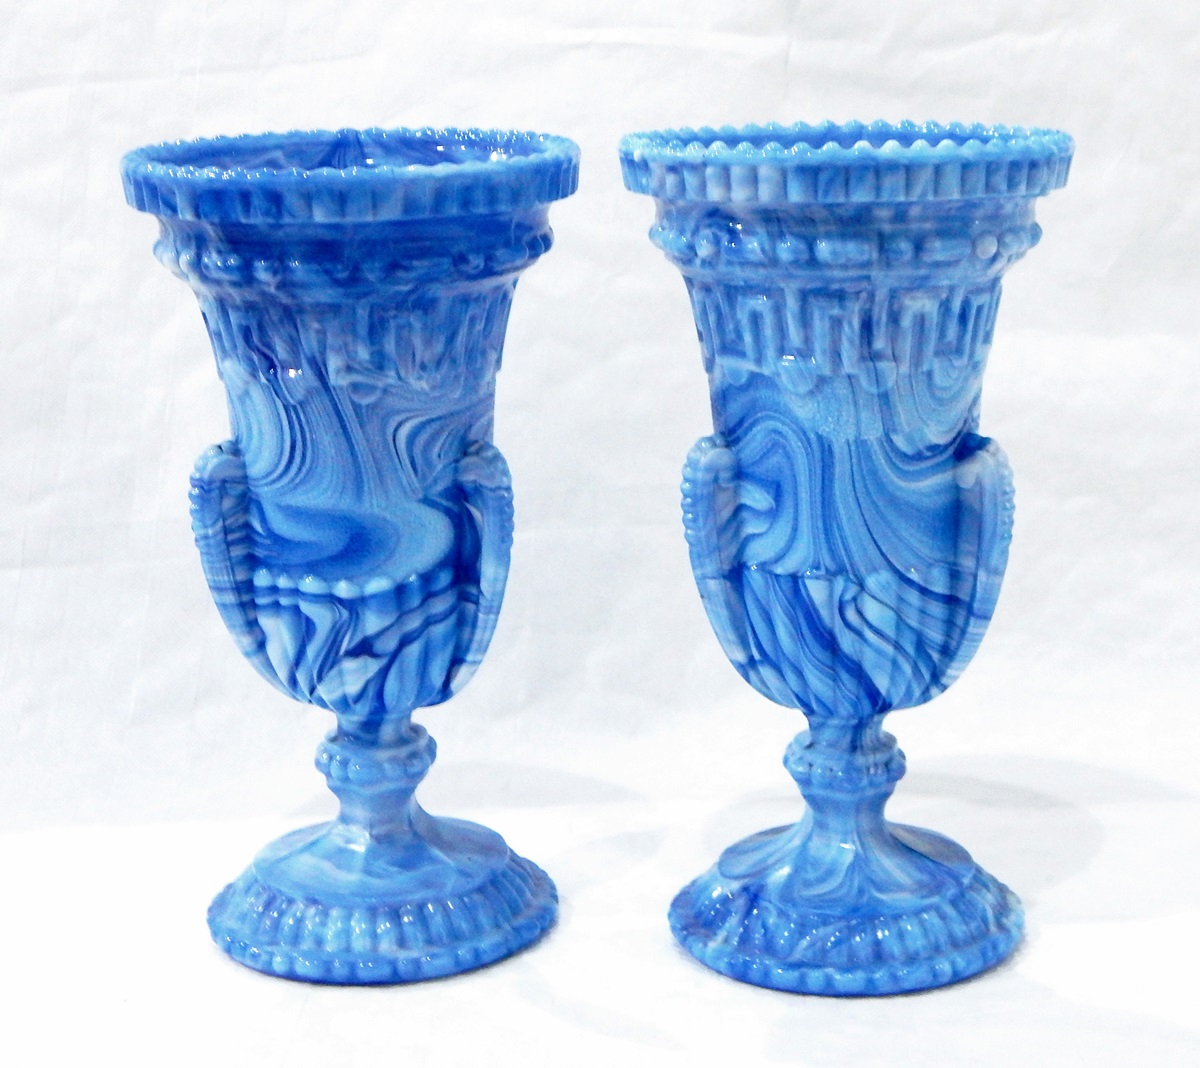 Pair of Victorian blue marbled pressed glass vases of urn form with borders of Greek key pattern, - Image 2 of 3